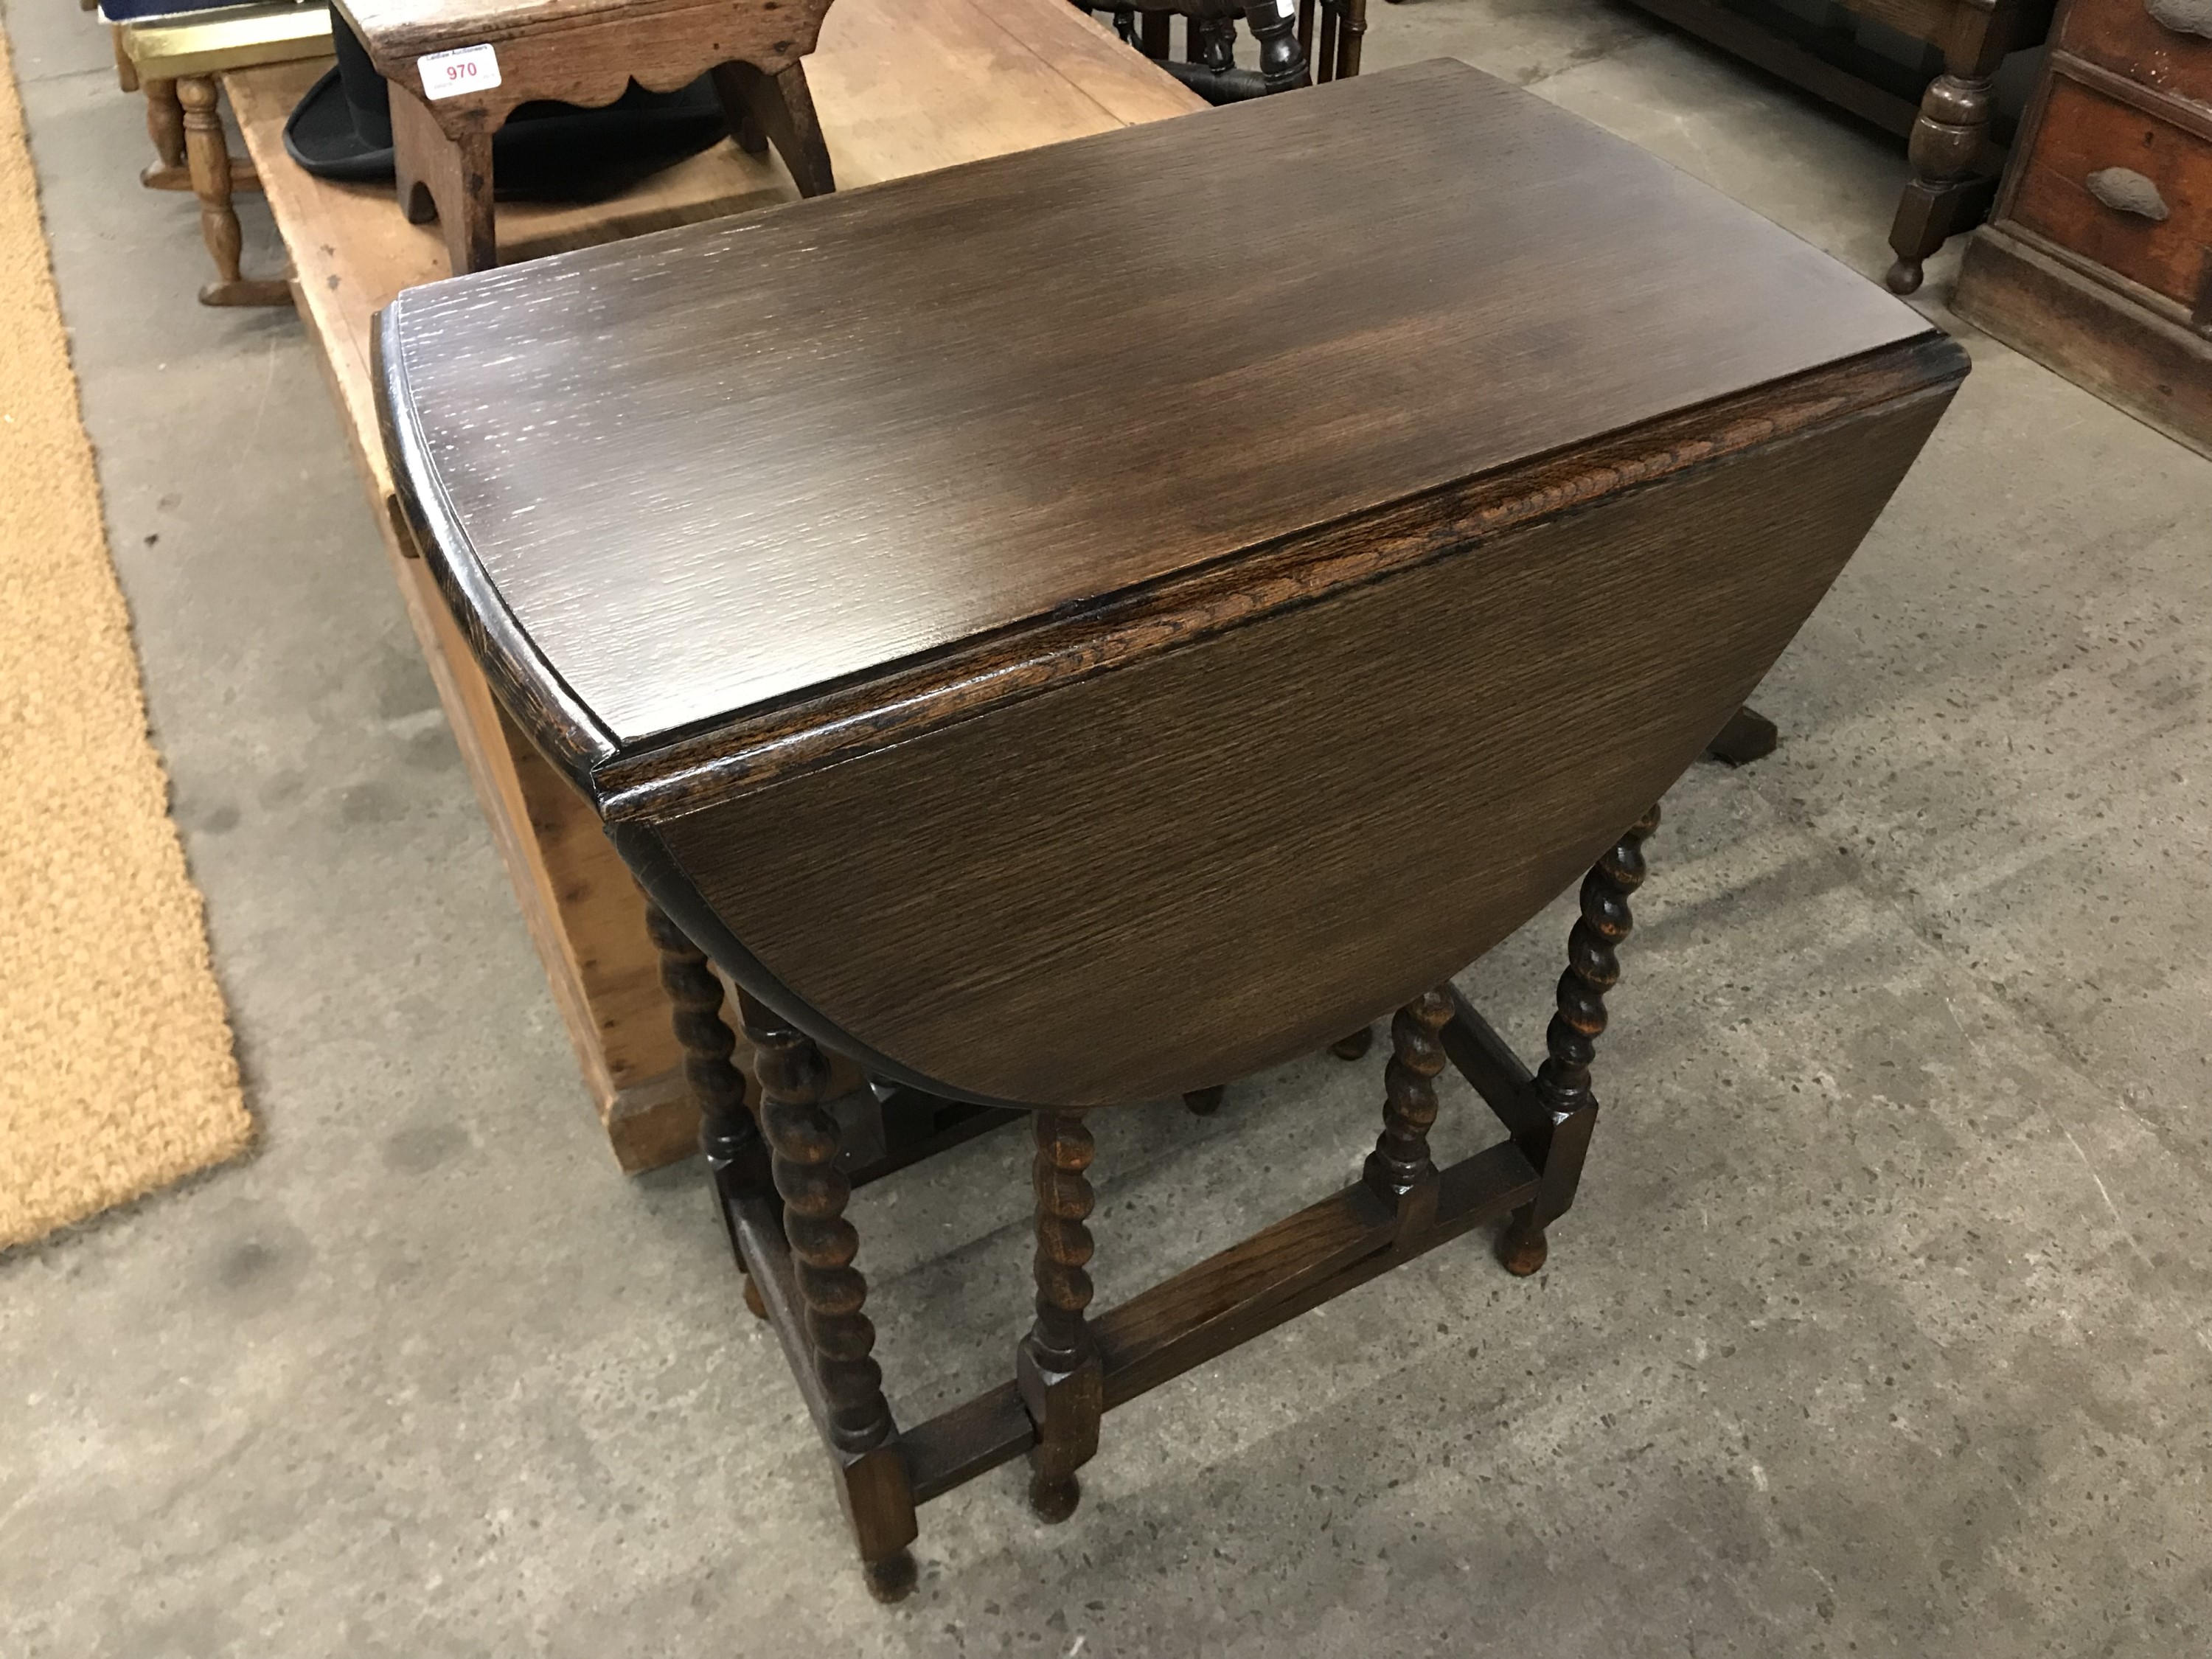 A small 1920s oak drop-leaf occasional table